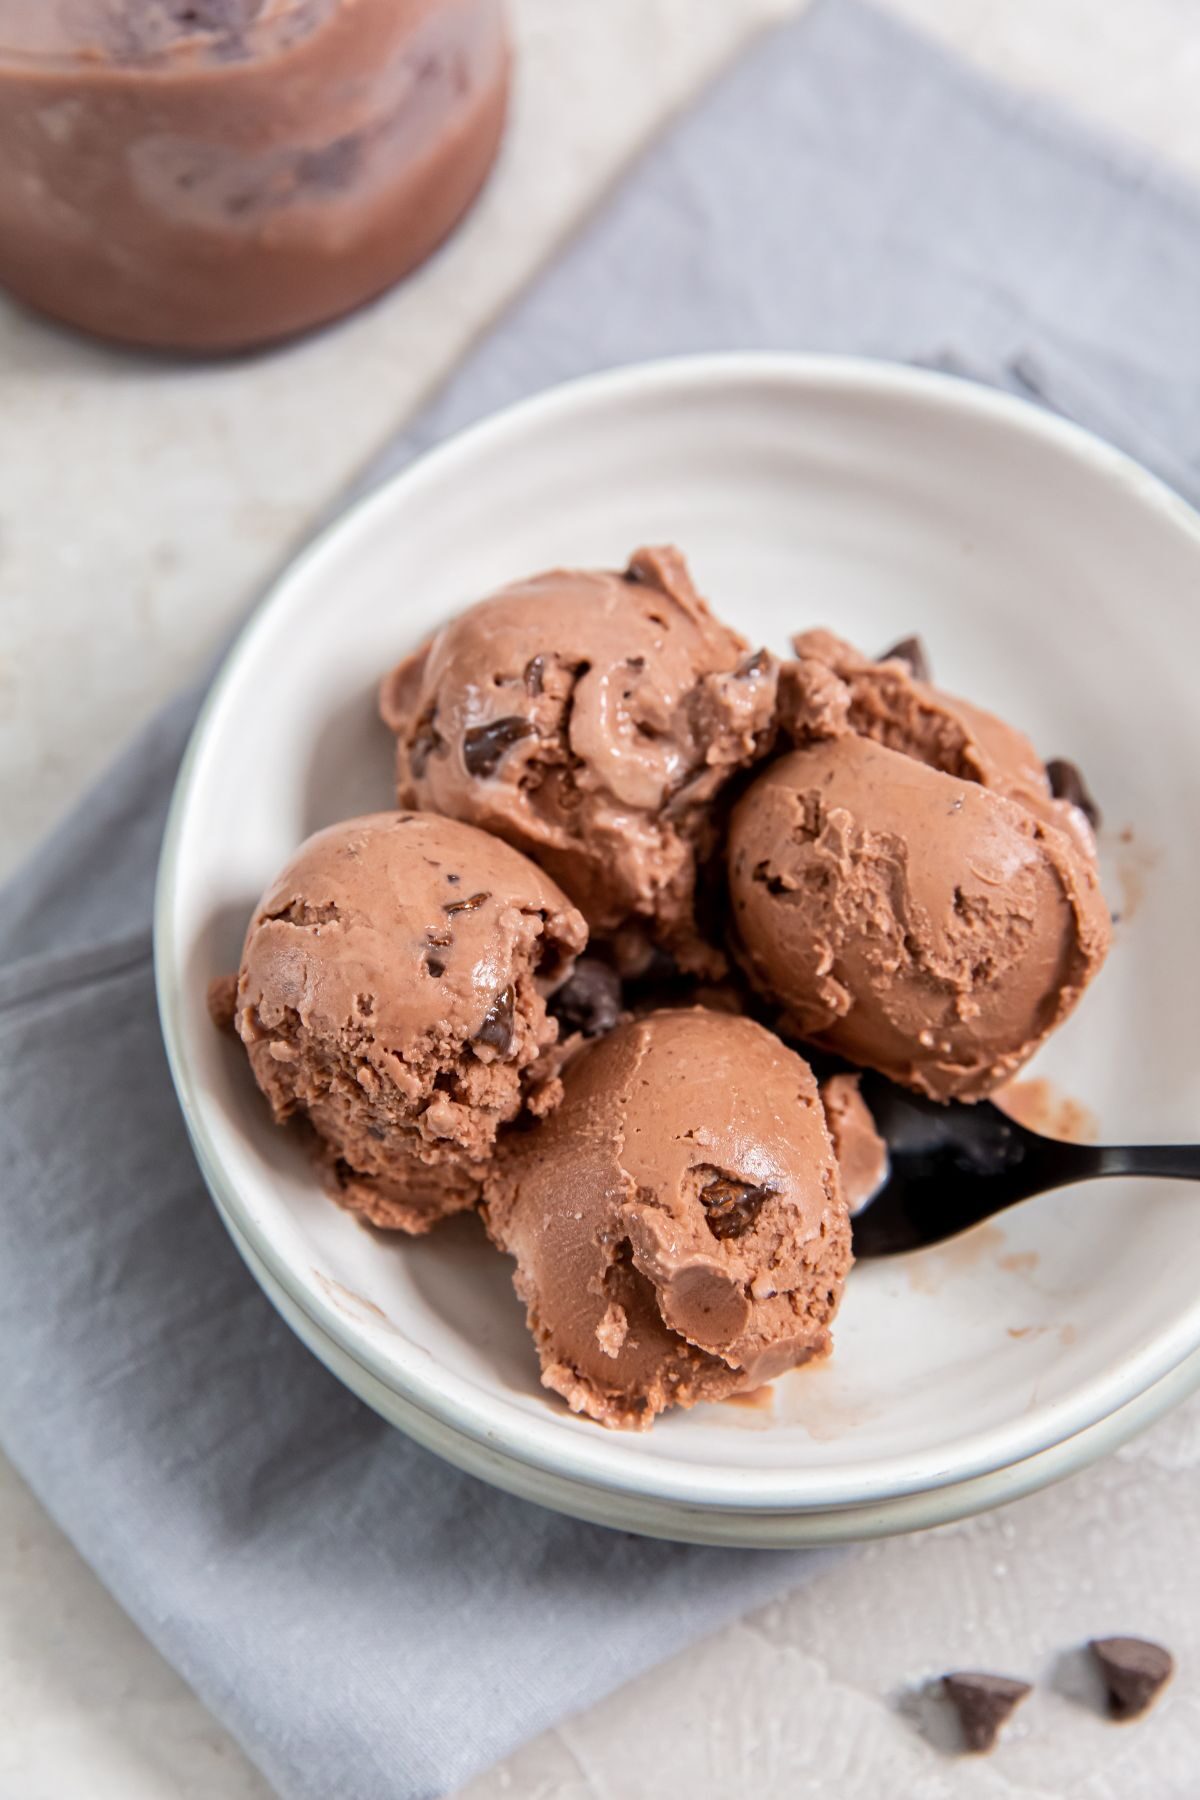 chocolate chocolate chip ice cream in a bowl with a black spoon on top of a light blue napkin